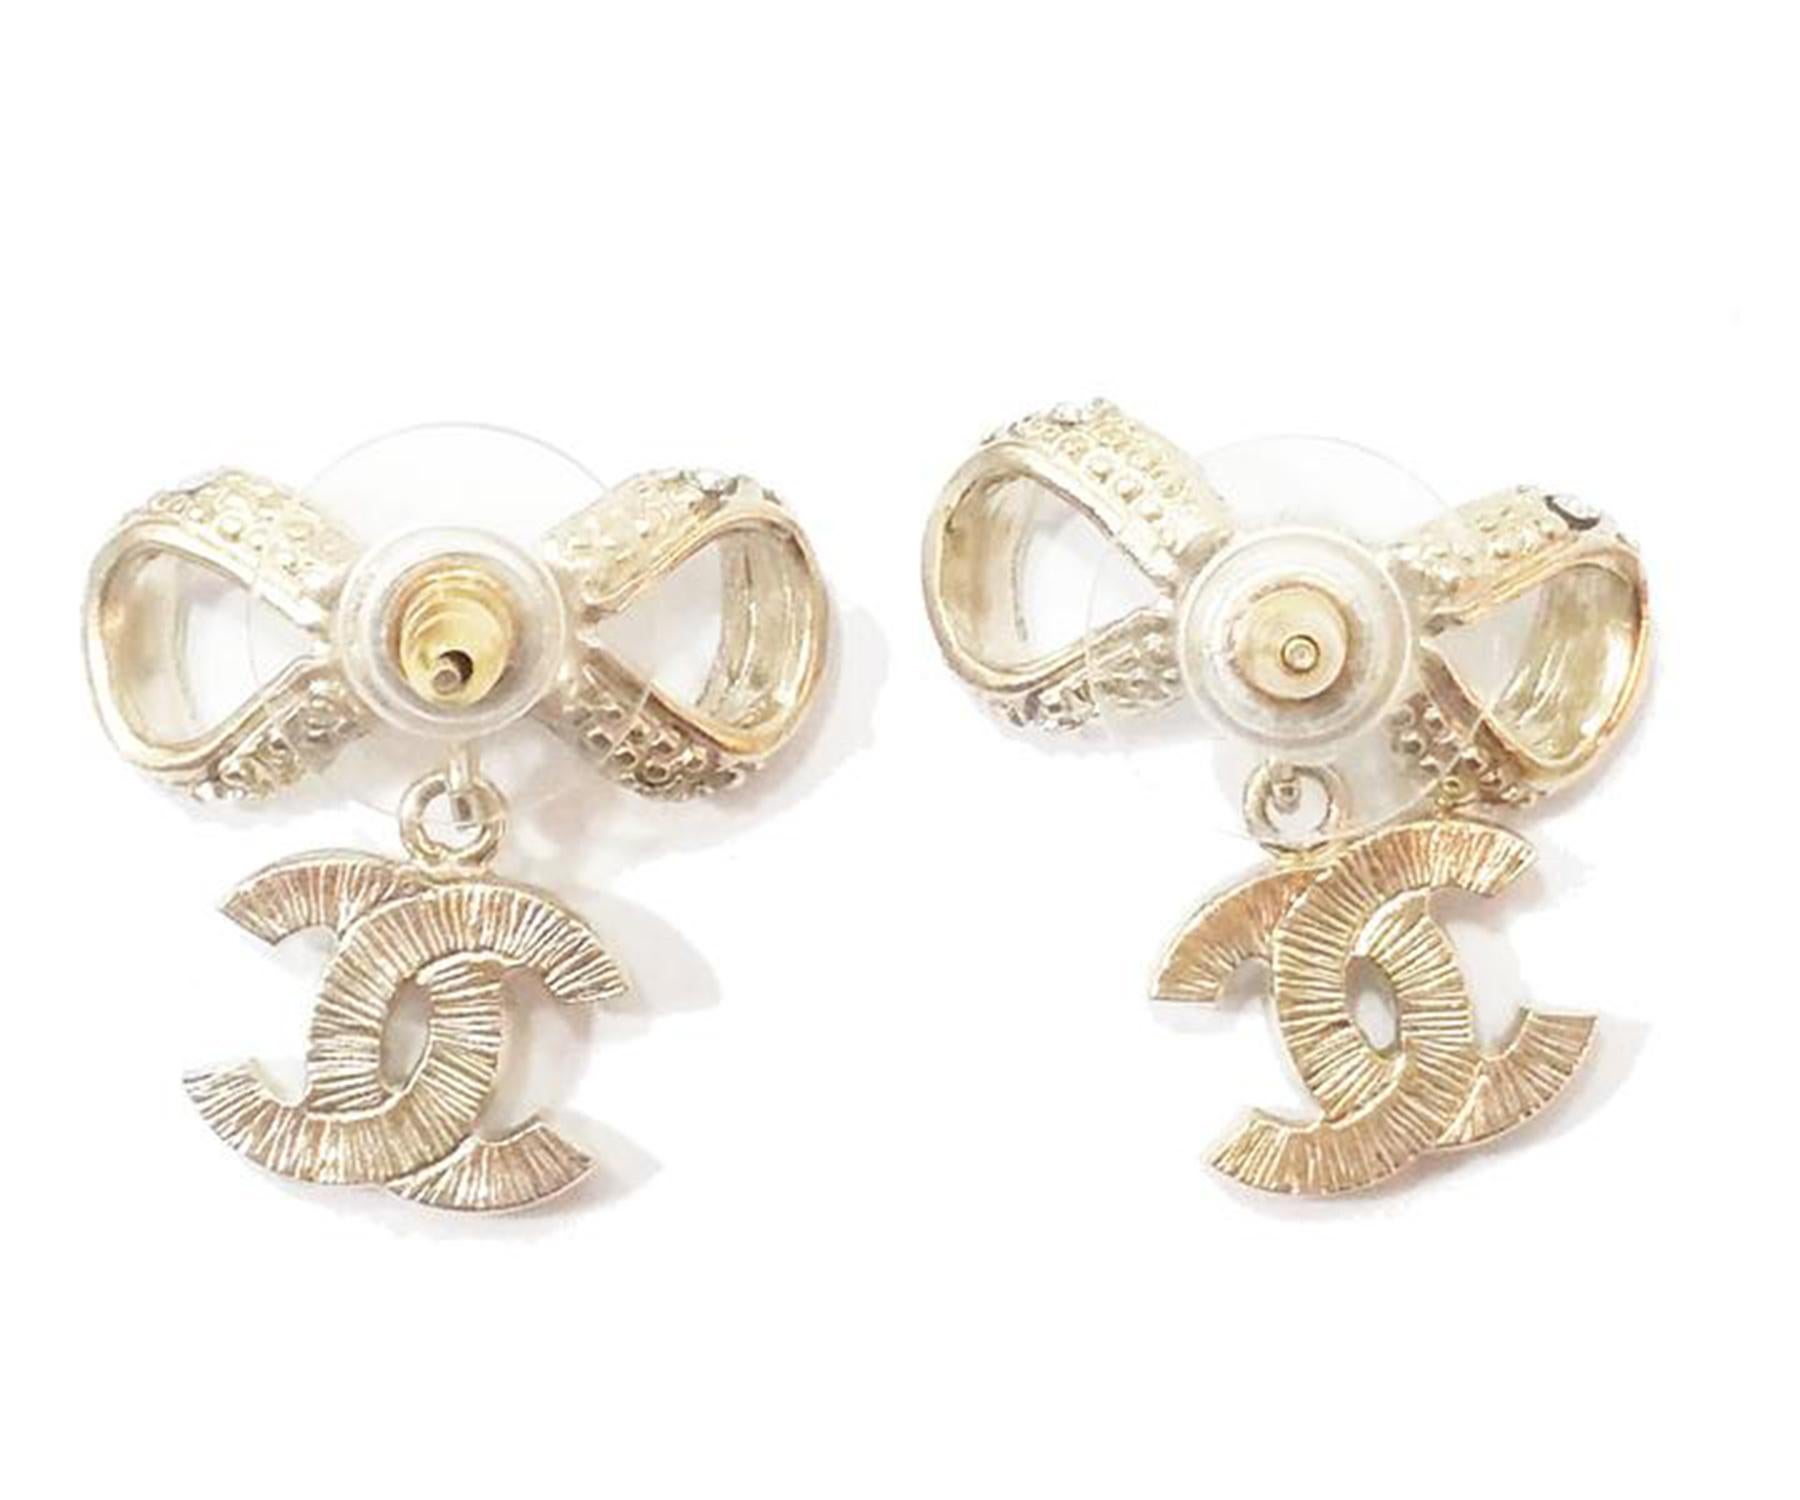 Chanel Classic Light Gold Ribbon Bow CC Crystal Piercing Earrings In Excellent Condition For Sale In Pasadena, CA